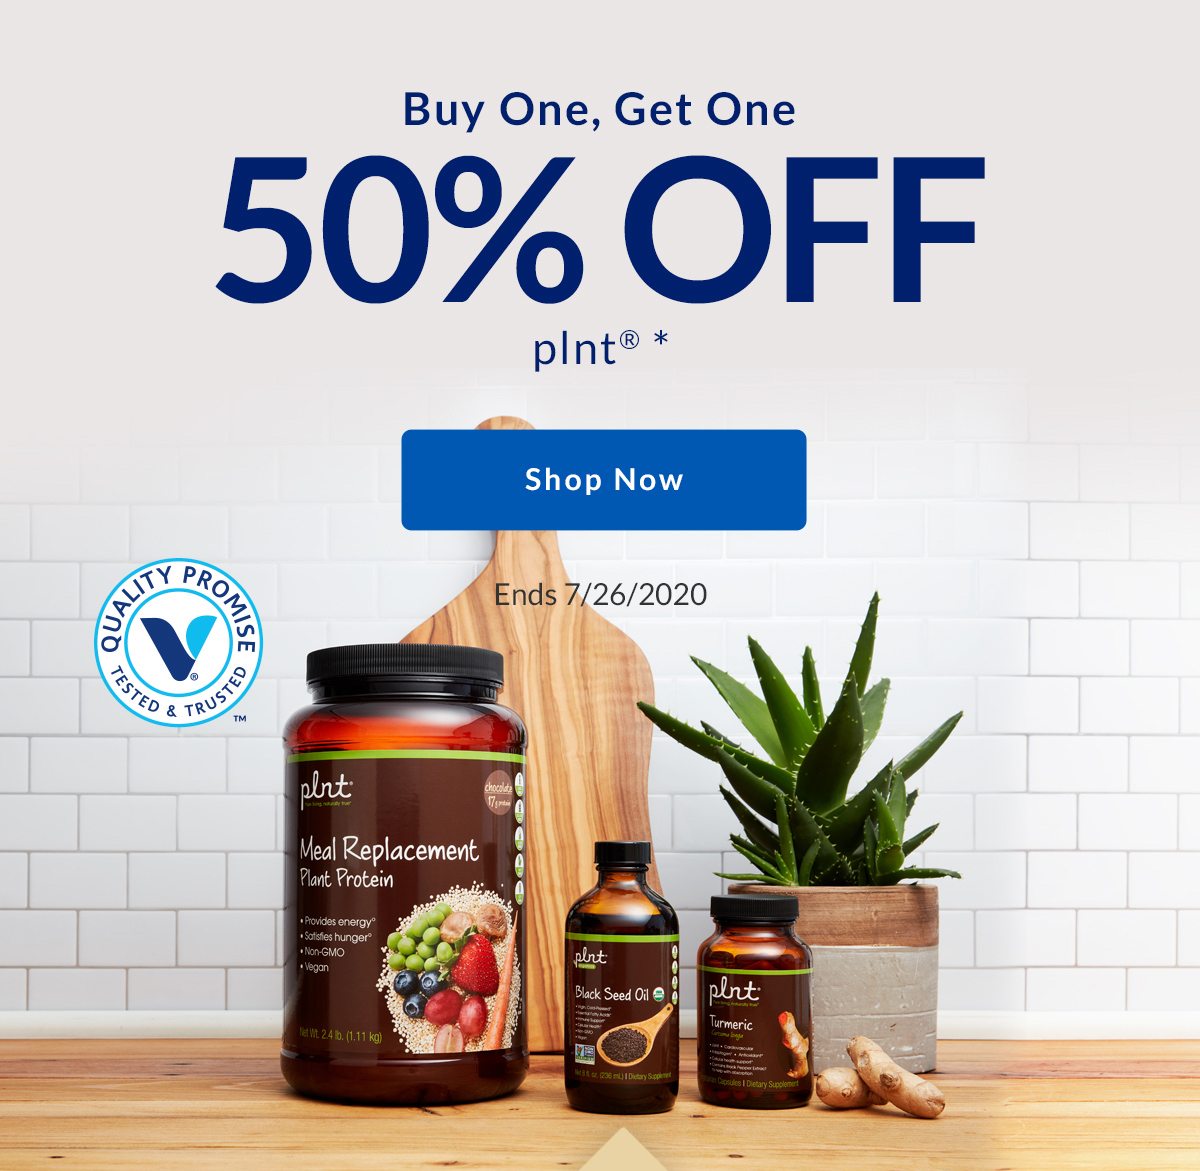 Buy One, Get One 50% OFF plnt * | Shop Now | Ends 7/26/2020